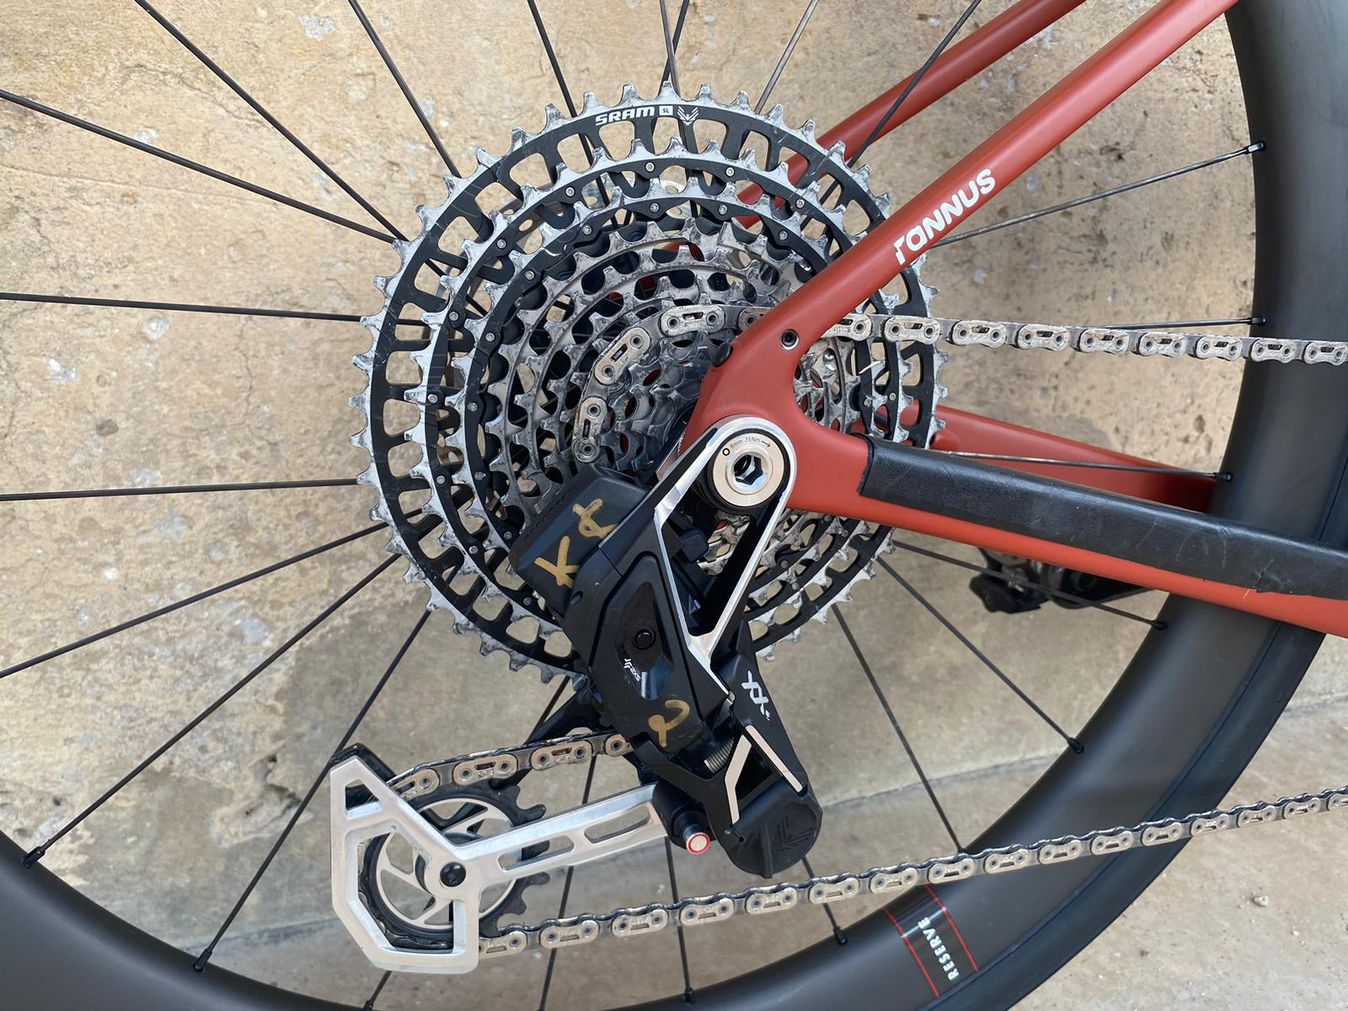 The rear SRAM Transmission that is compatible with Swenson's bike. Most gravel bikes are not UDH (Universal Derailleur Hanger) compatible at this juncture